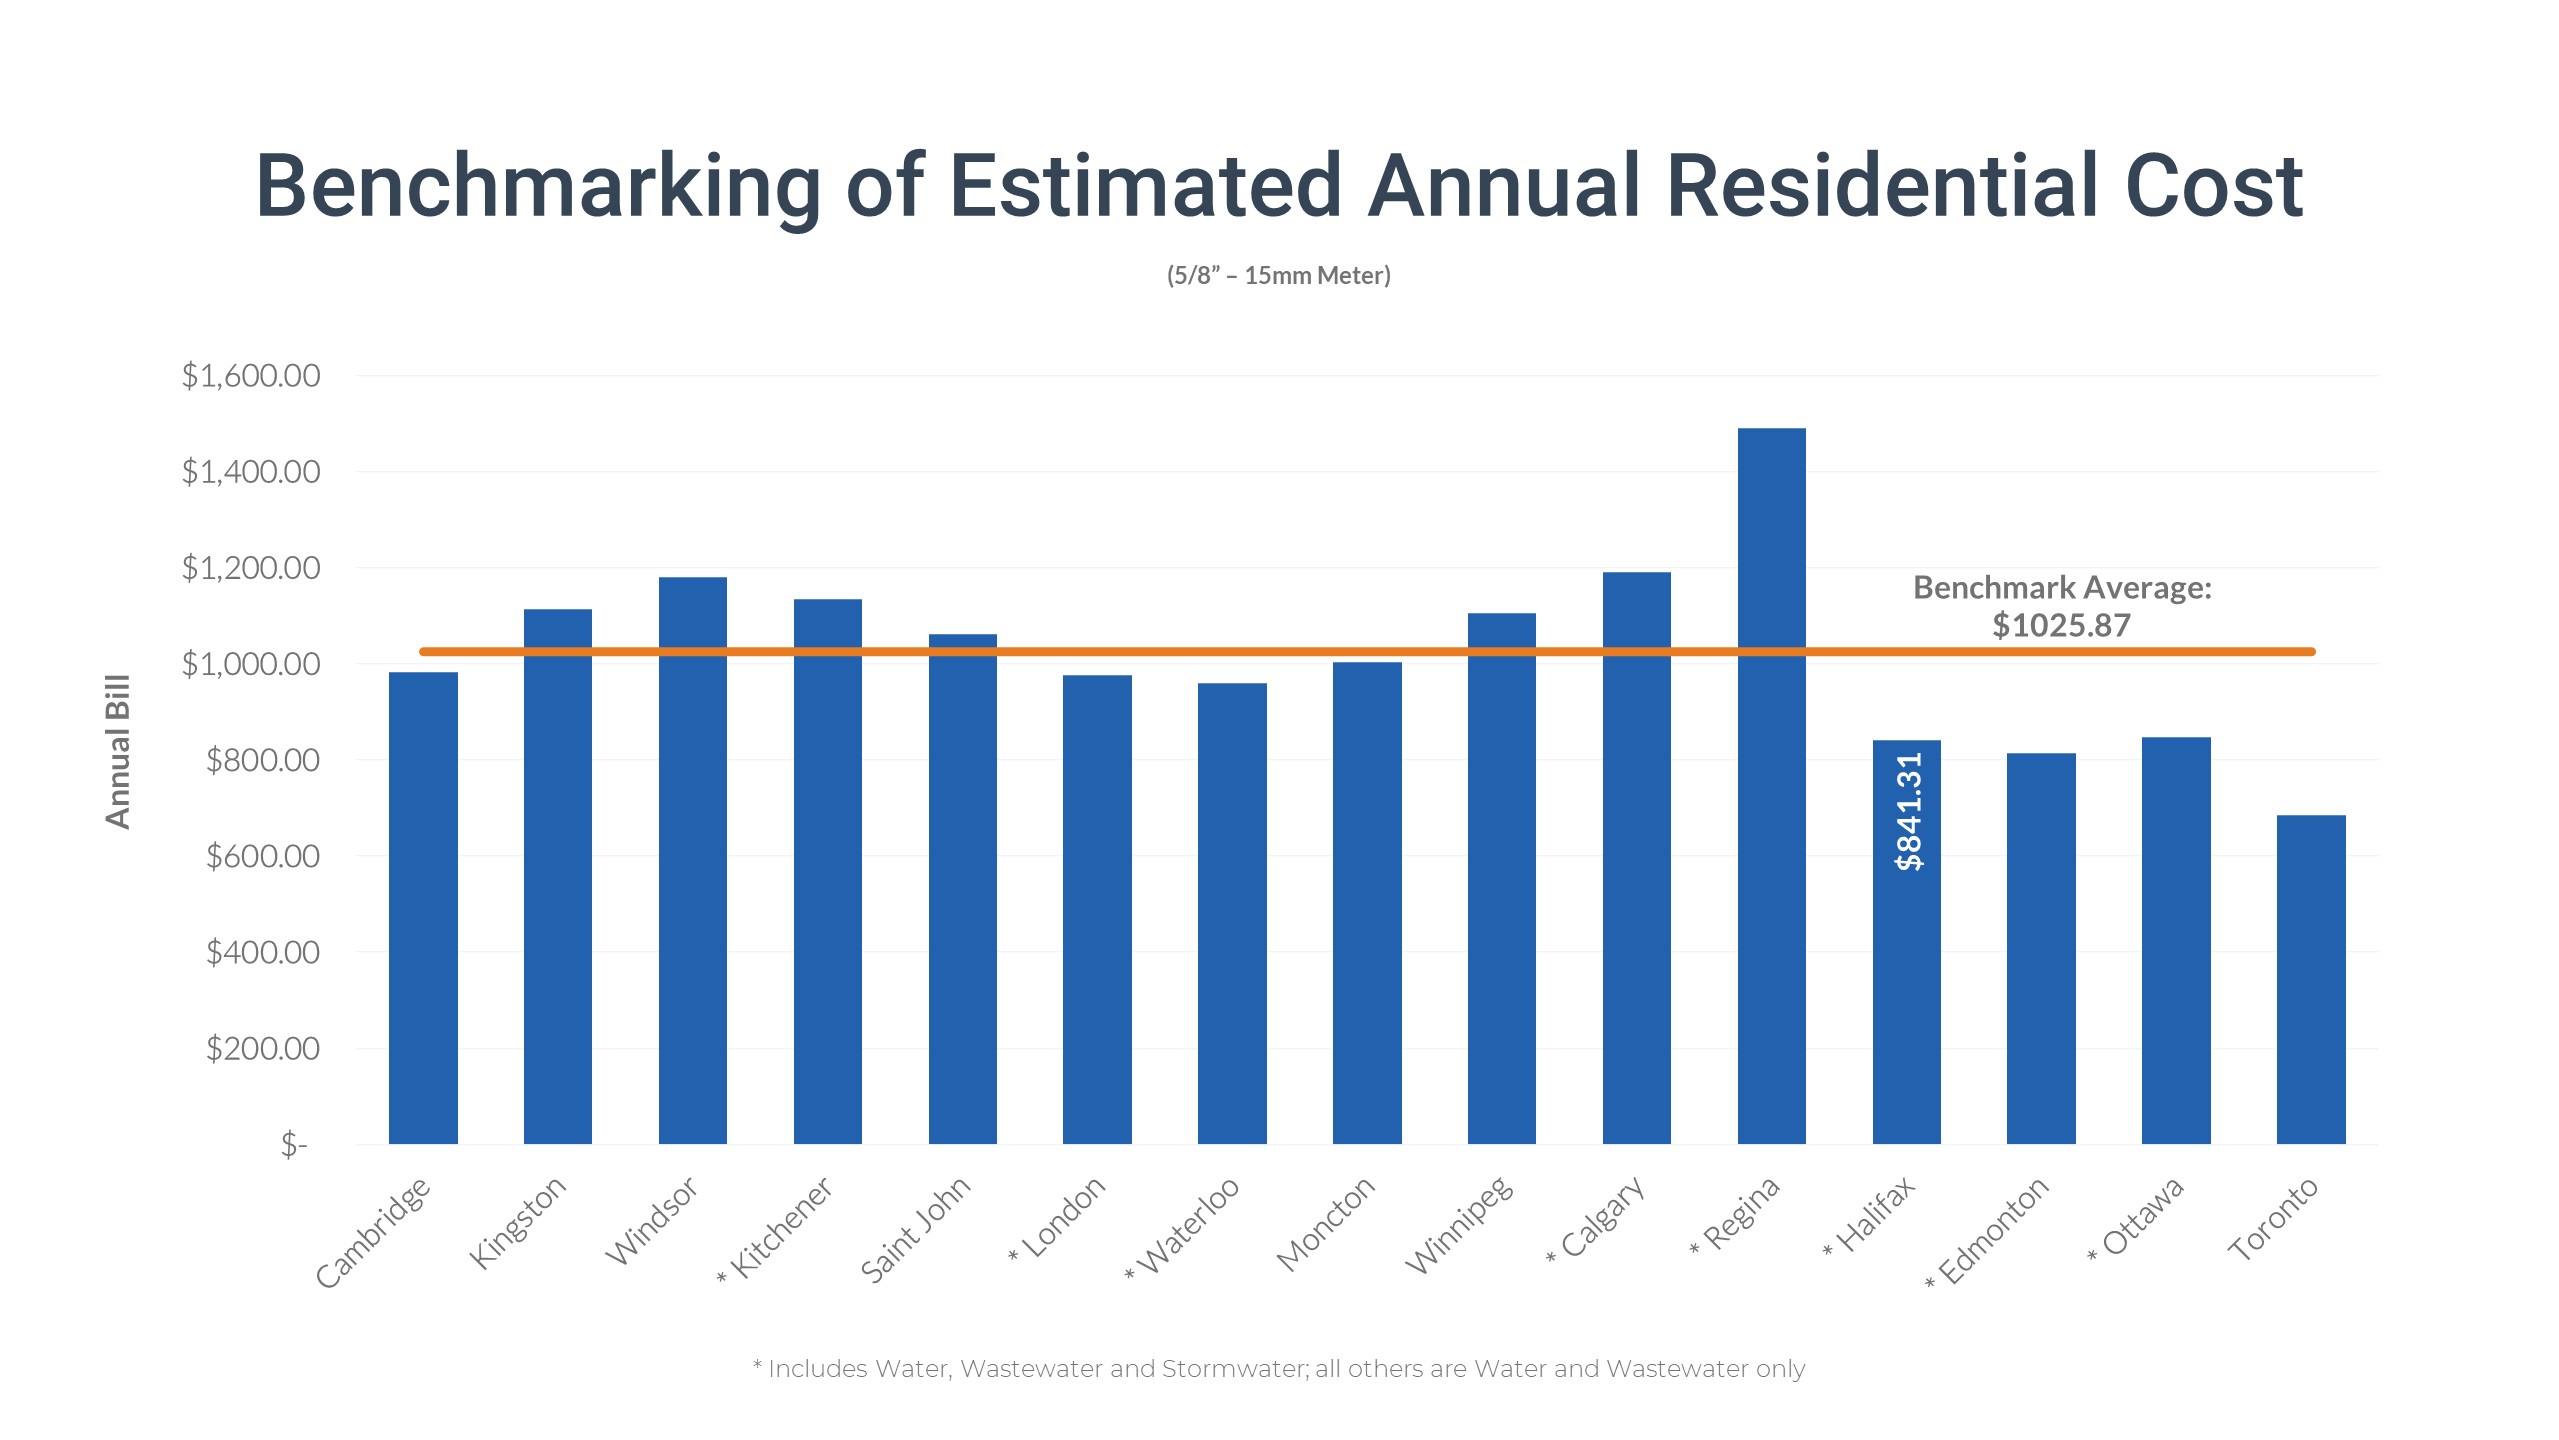 Benchmarking Average Annual Residential Cost - Feb 2022